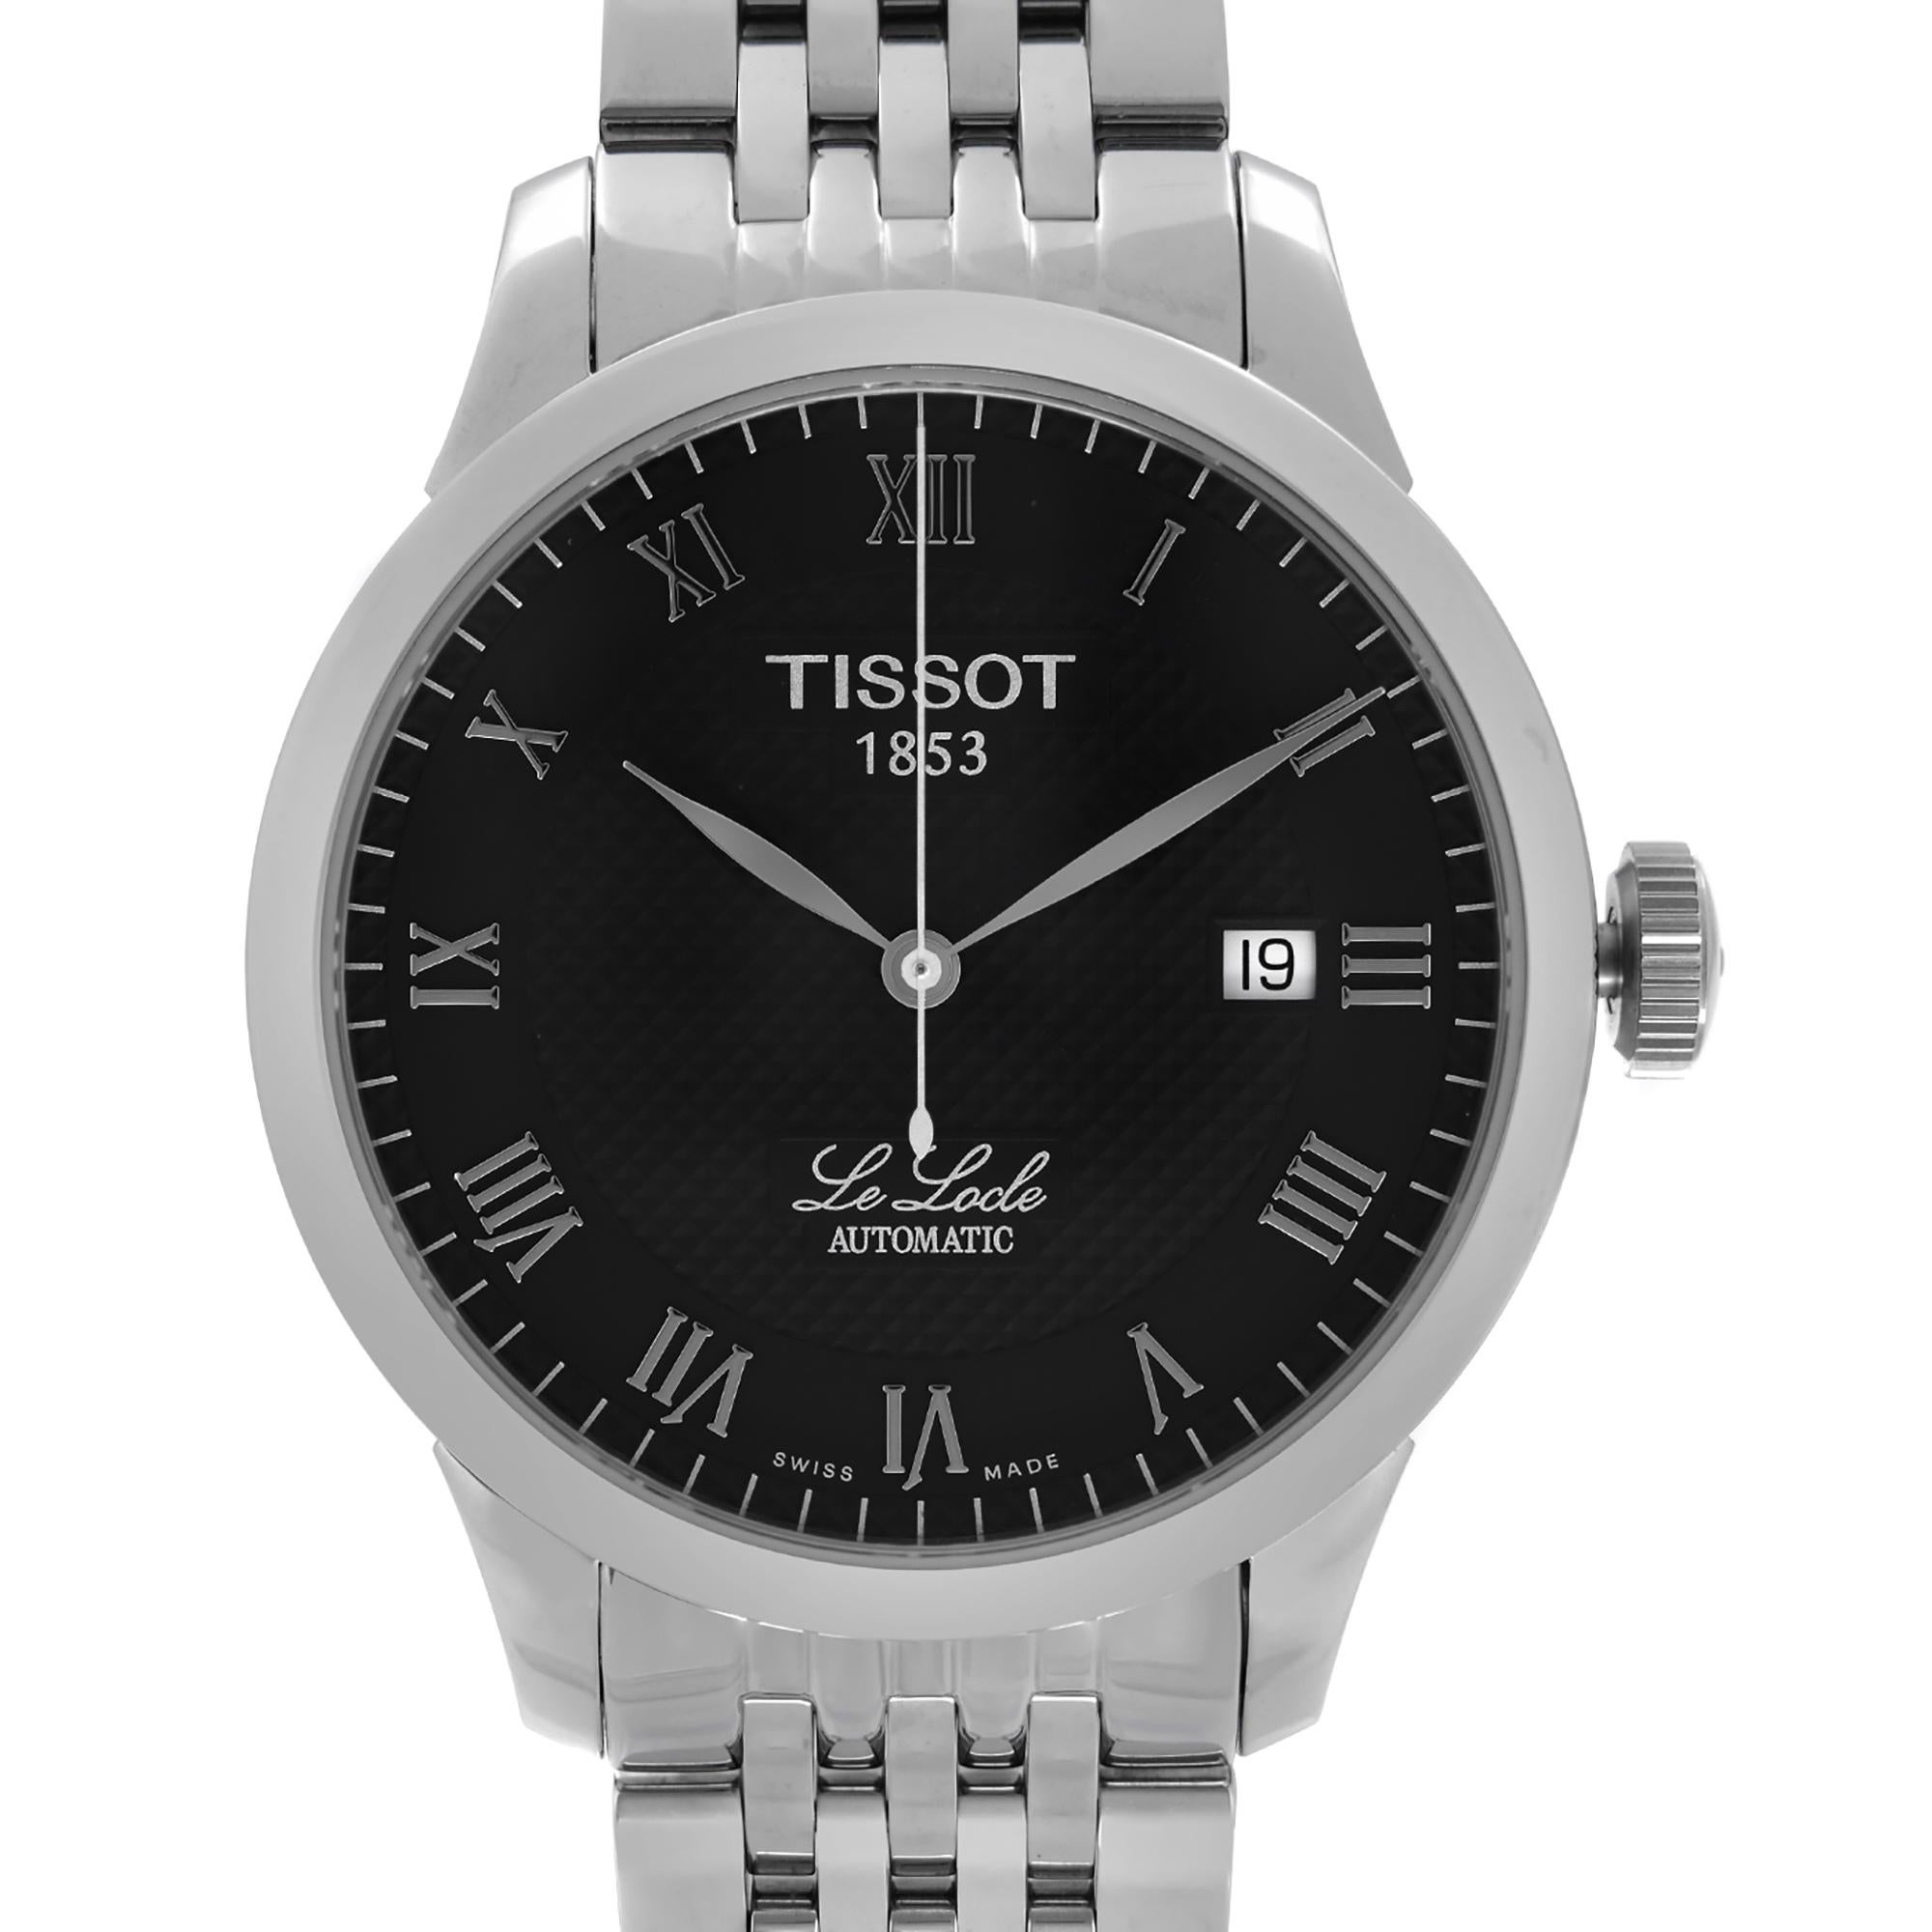 Display Model Tissot Le Locle 39mm Stainless Steel Black Dial Automatic Men's Watch T41.1.483.53. This Beautiful Timepiece is Powered by Mechanical (Automatic) Movement And Features: Stainless Steel & Bracelet, Fixed Stainless Steel Bezel, Black